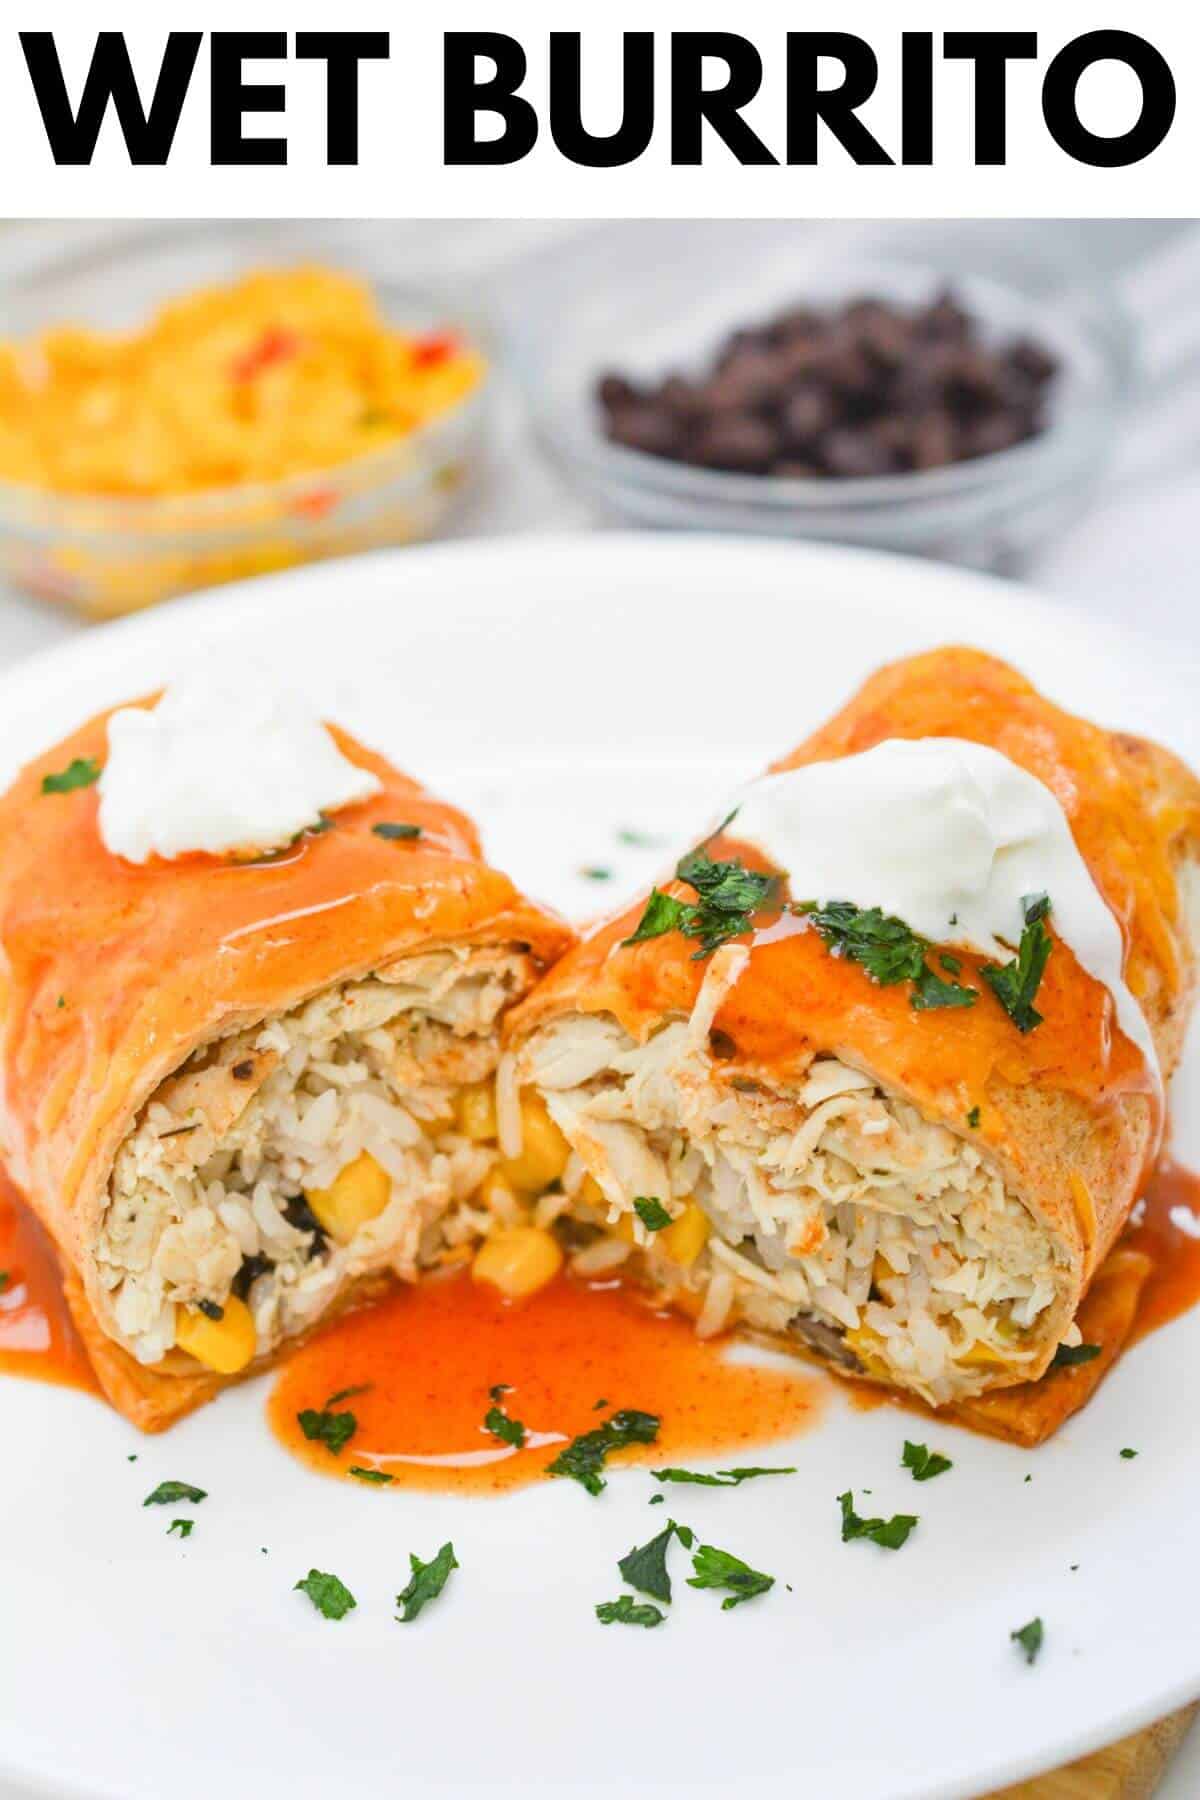 Wet burrito on a white plate.